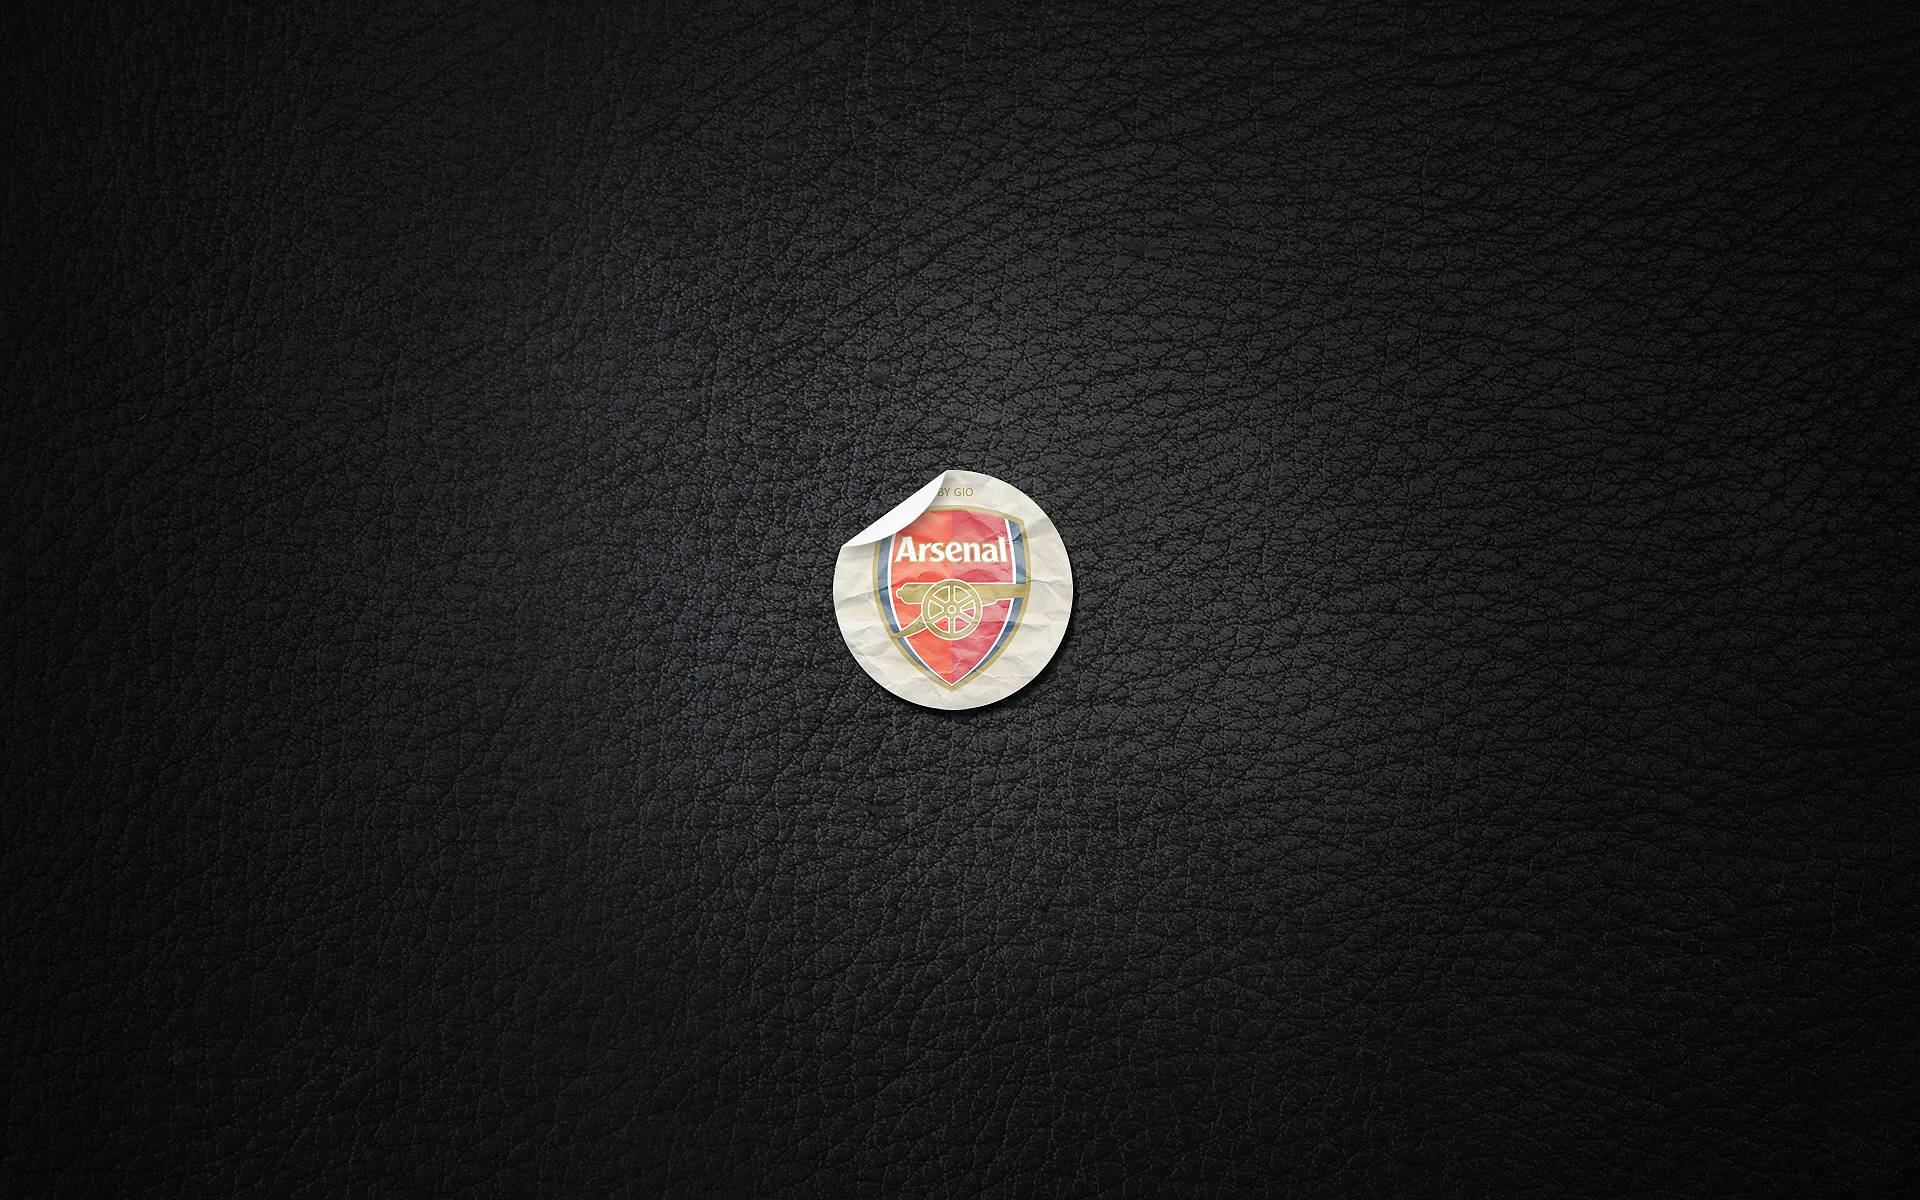 Arsenal_FC_wallpaper_by_gio